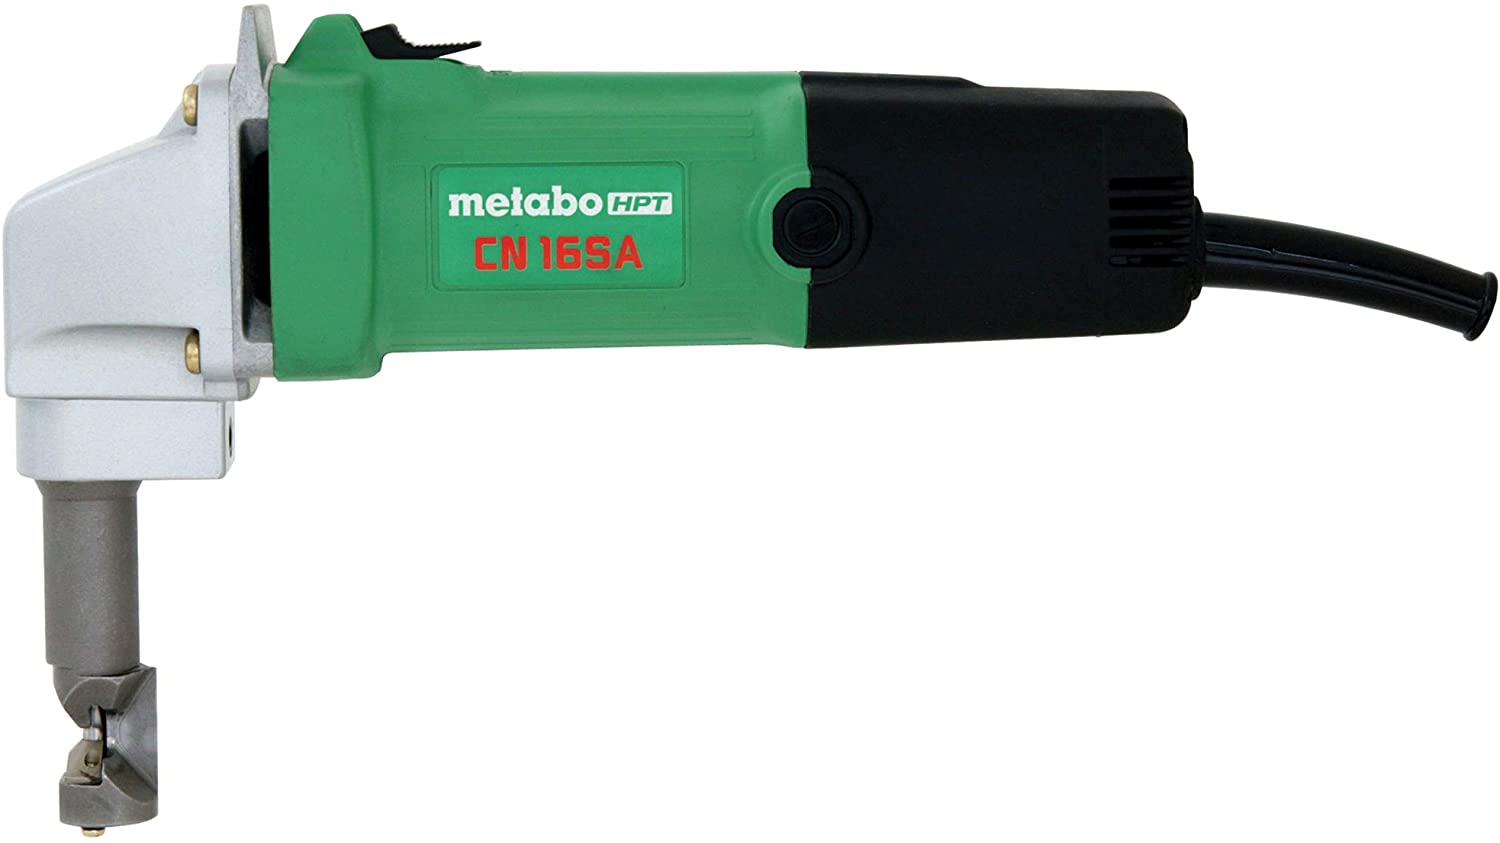 Metabo Plate shears & Nibblers Category